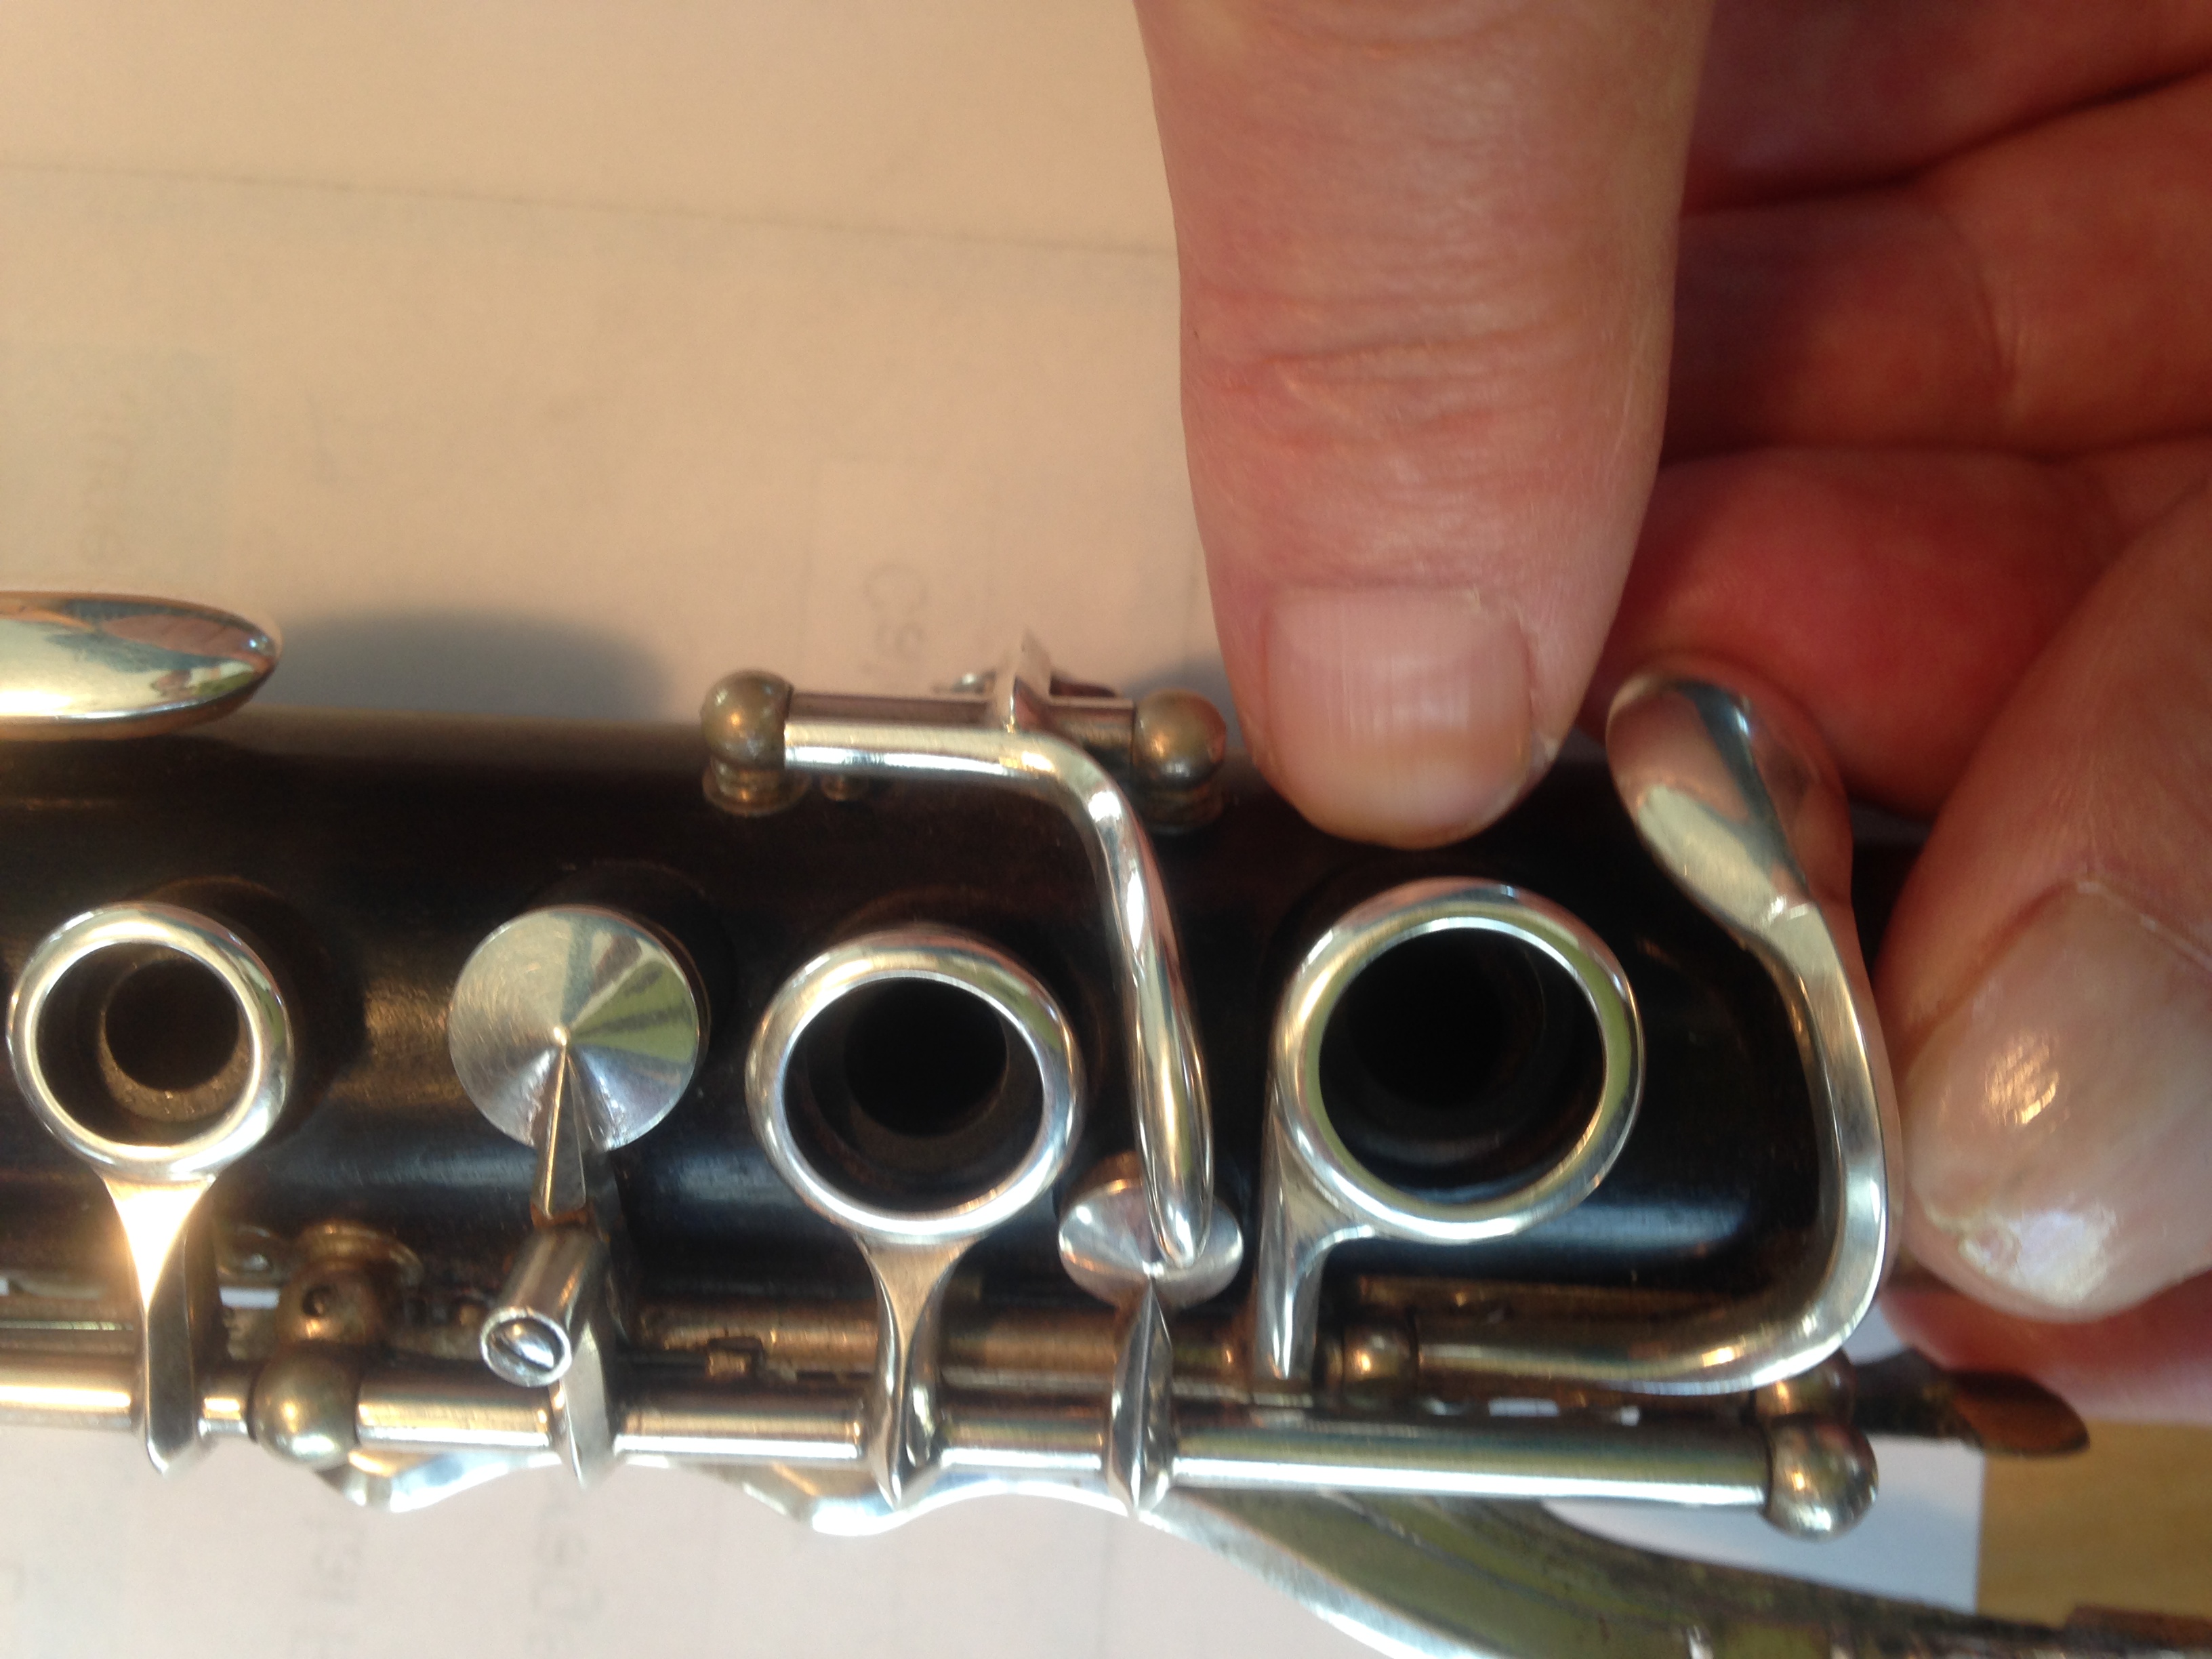 buffet crampon clarinet serial number chart